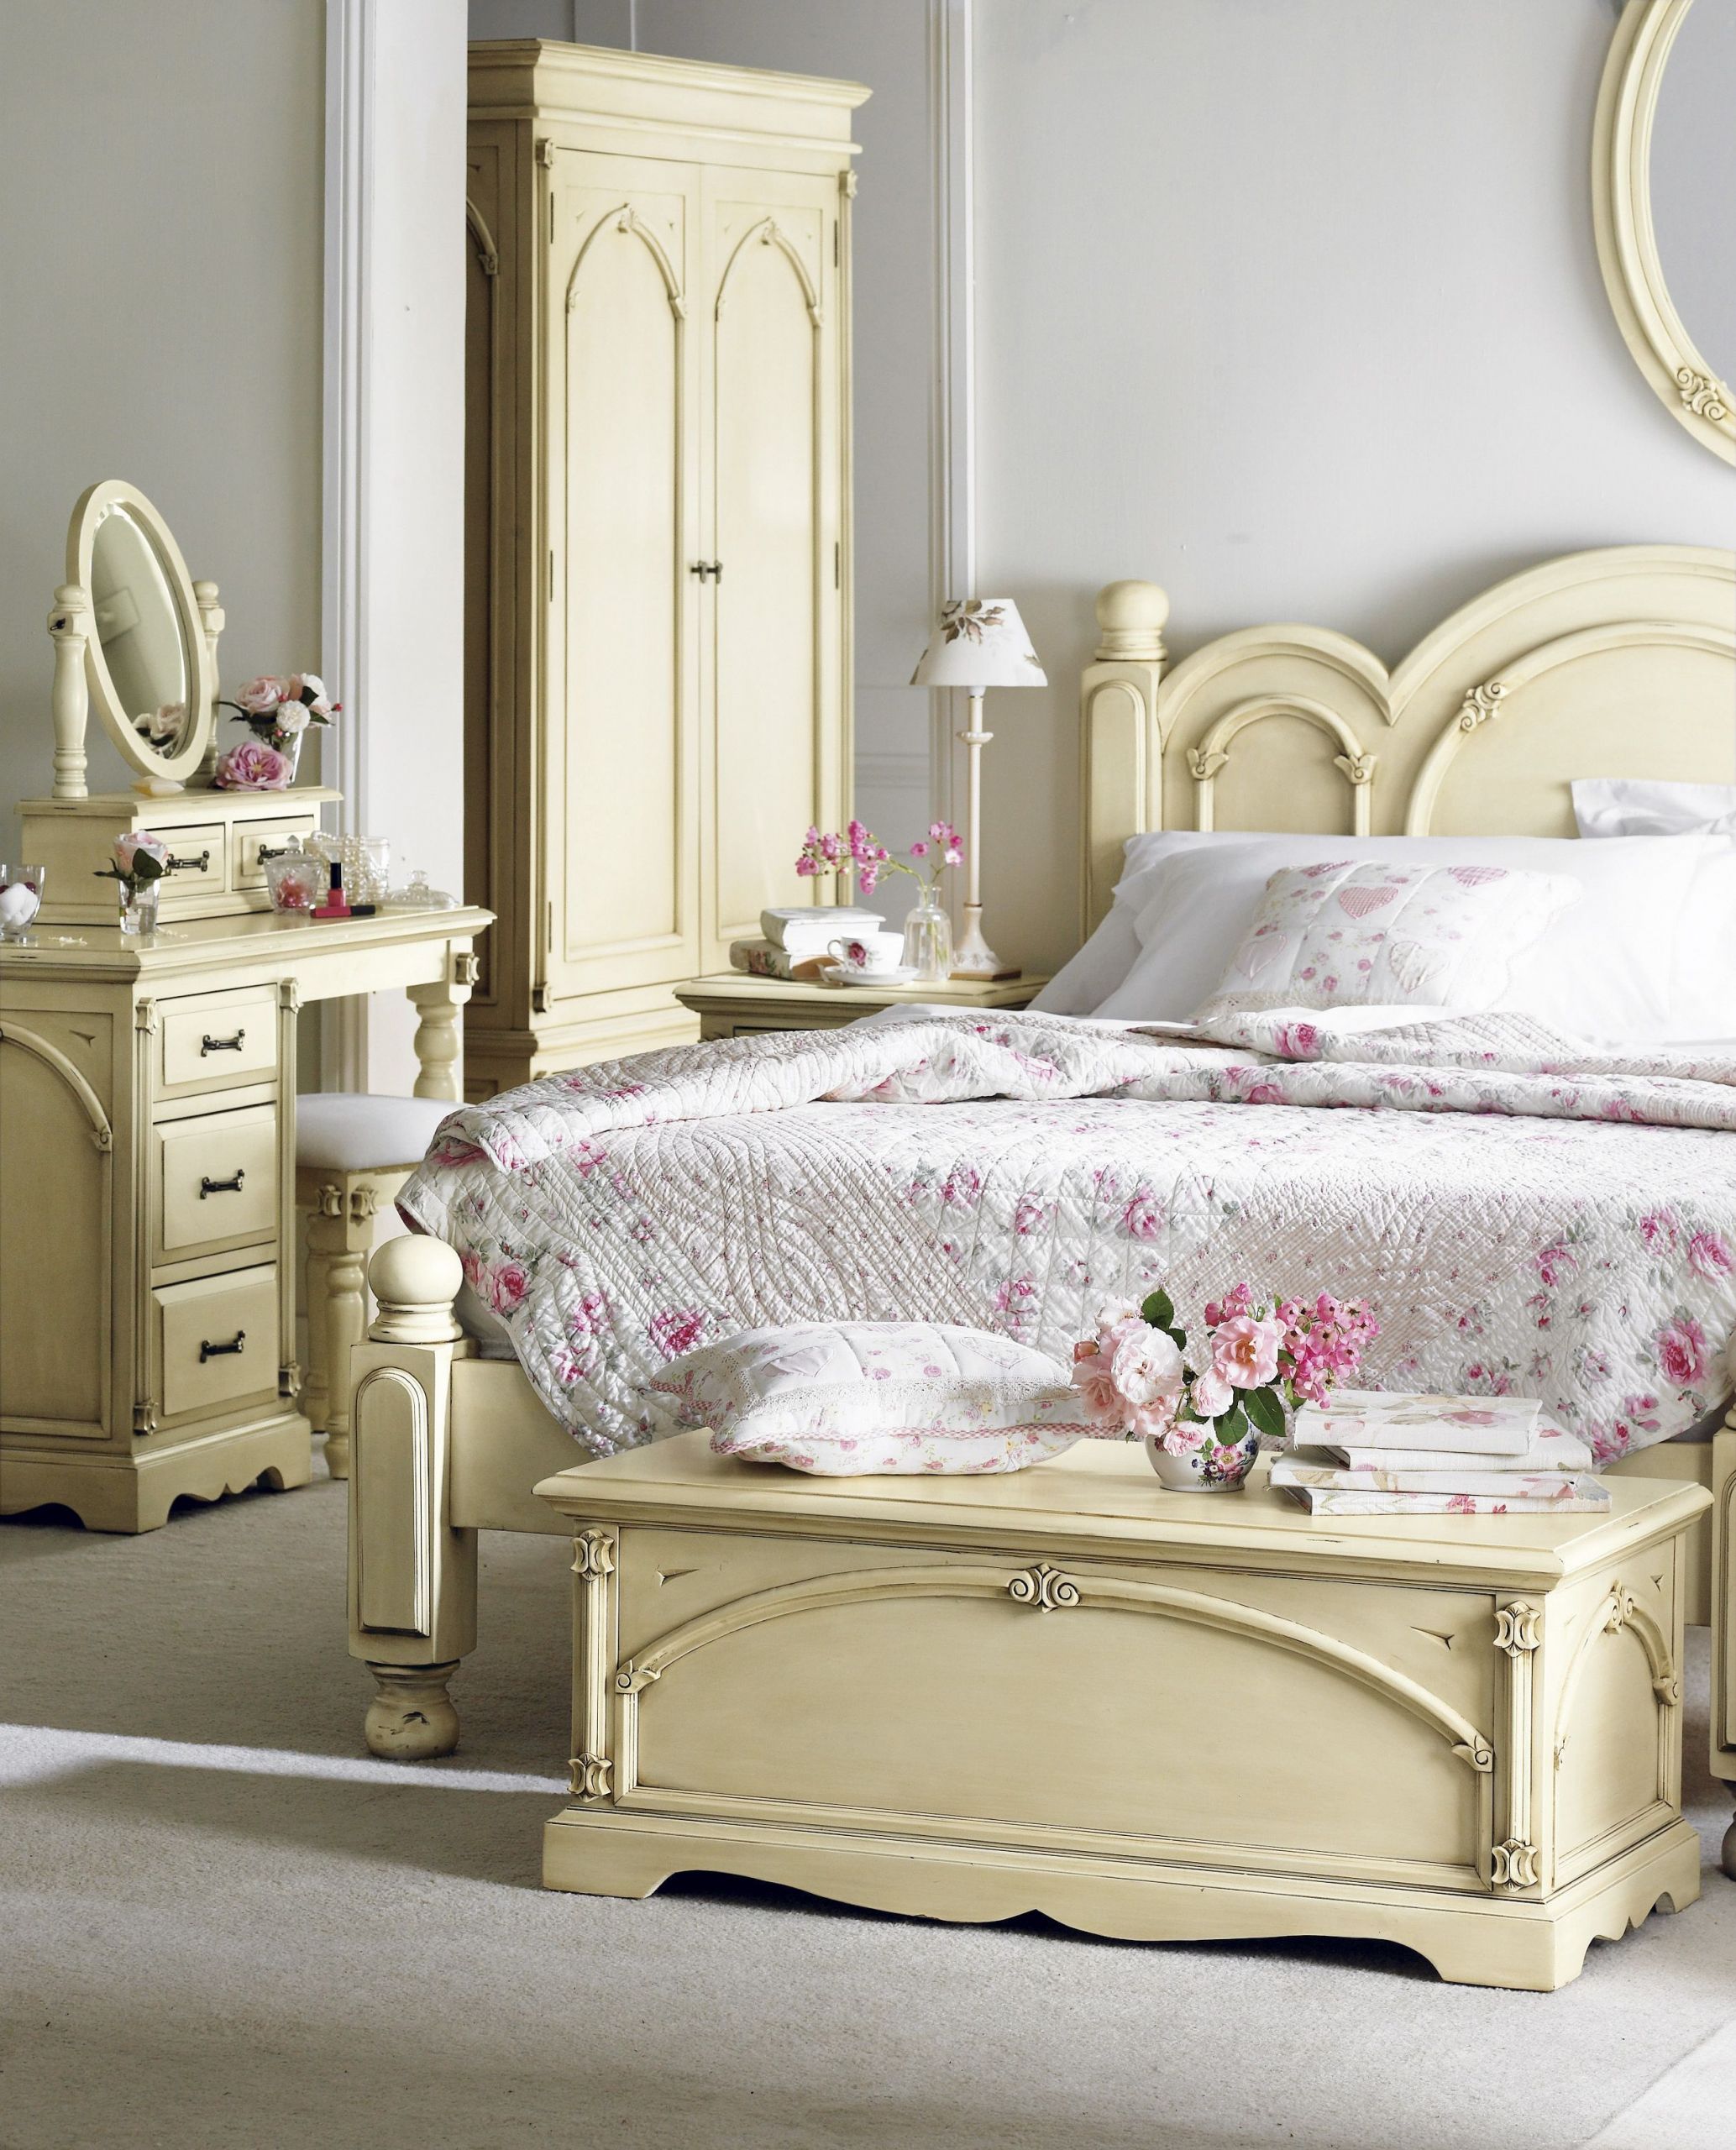 Shabby Chic Bedroom Sets
 20 Awesome Shabby Chic Bedroom Furniture Ideas